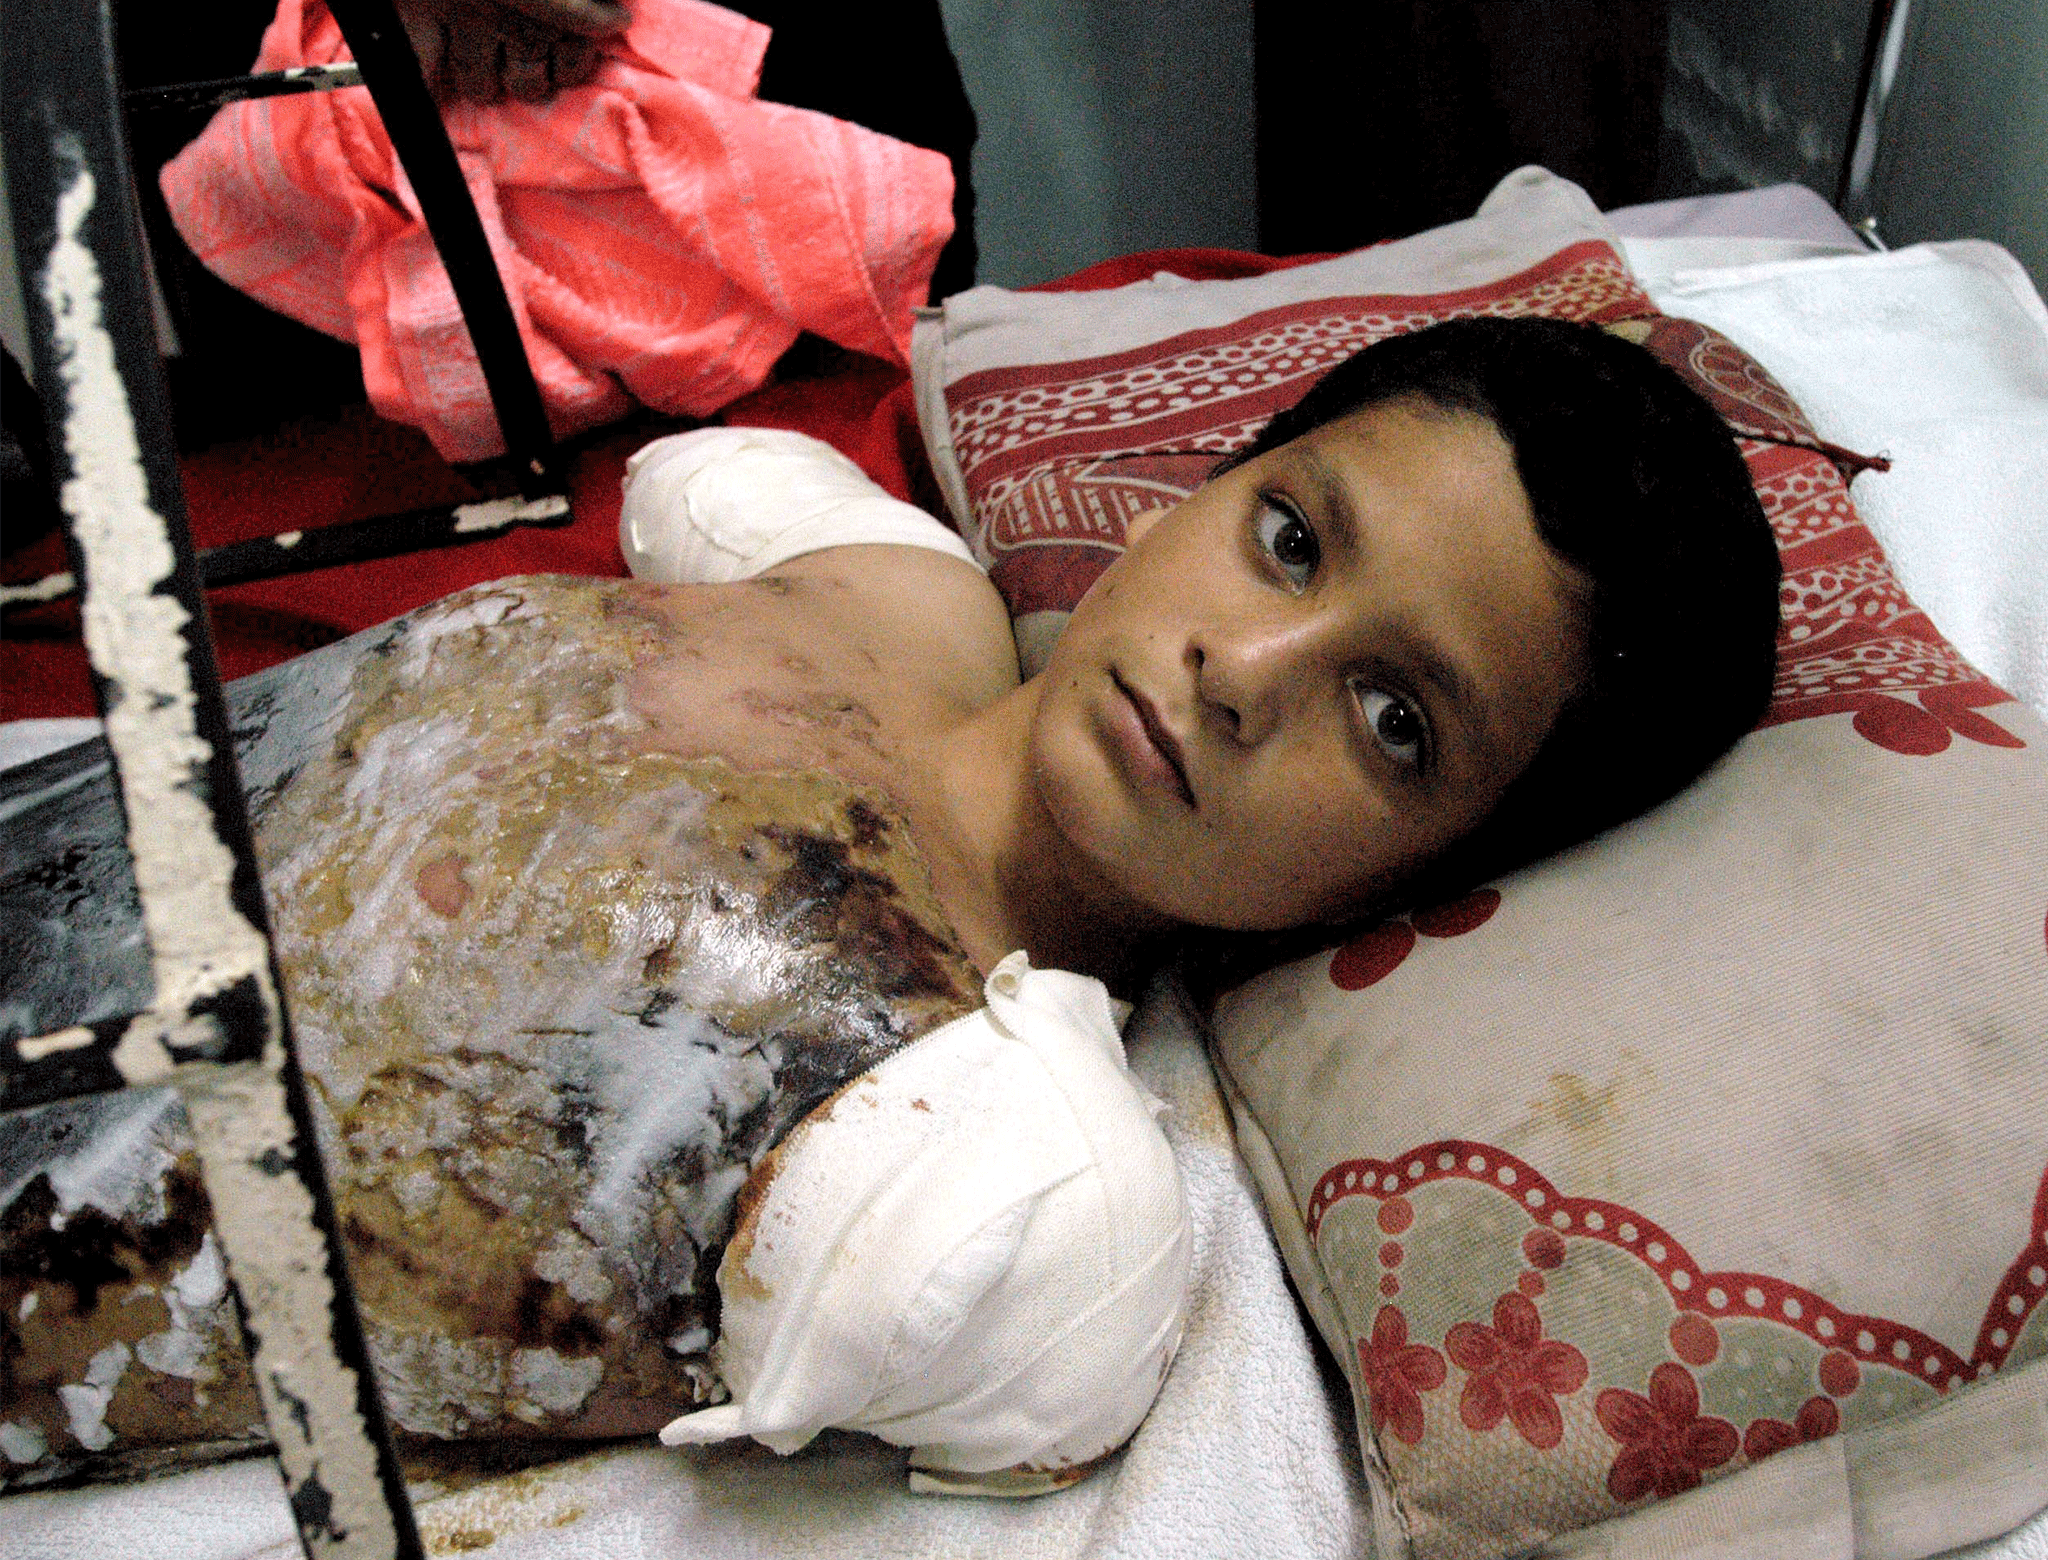 Ali Abbas, aged 12, in an Iraqi hospital after a US airstrike